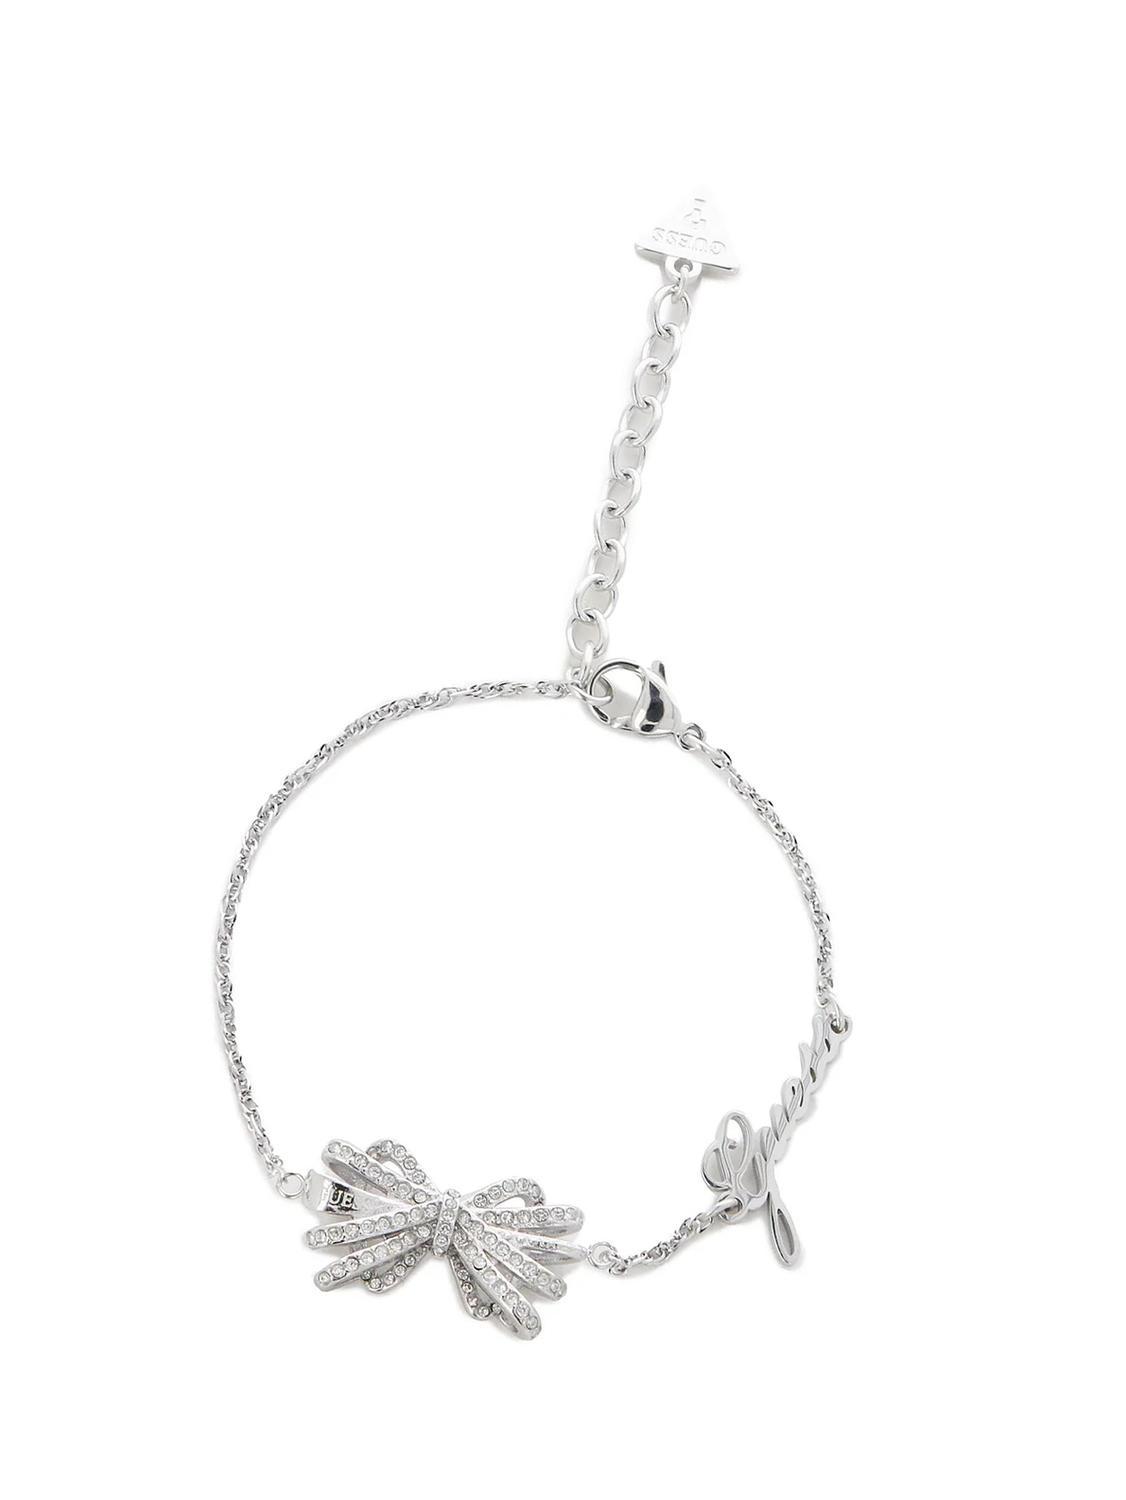 Silver bracelet with hanging butterflies from Brand Guess - Italianisa